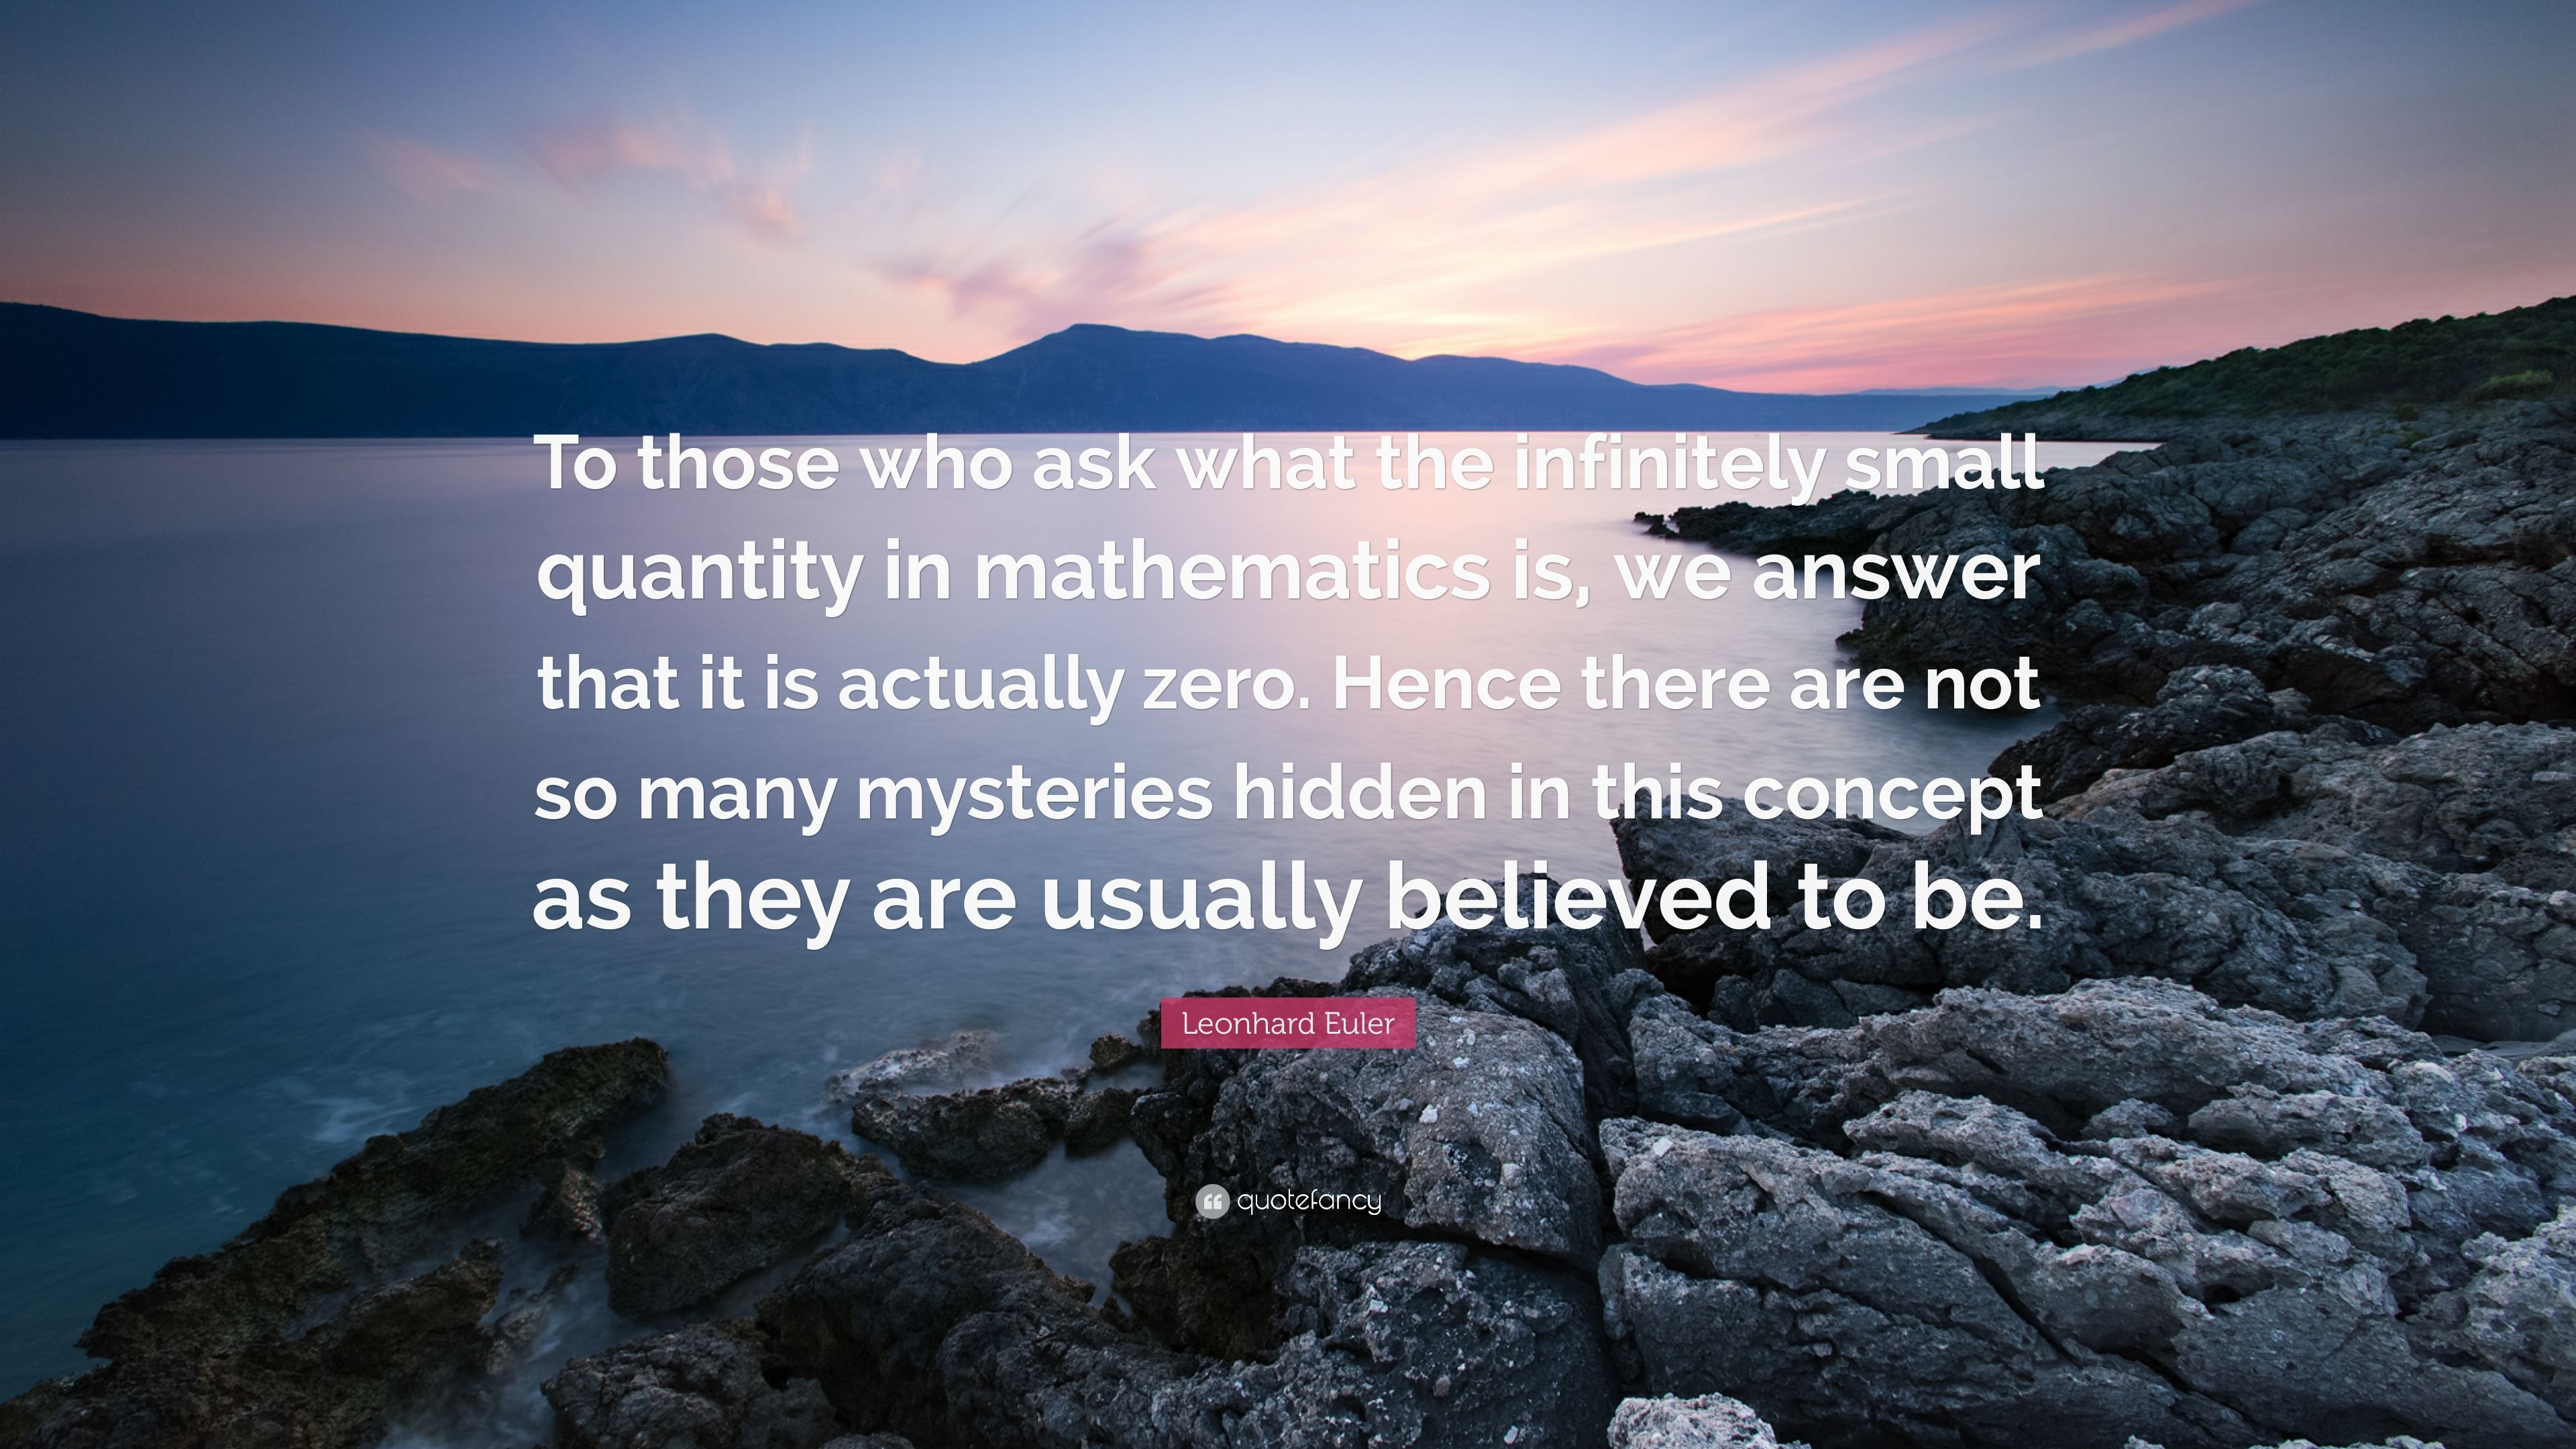 Leonhard Euler Quote: “To those who ask what the infinitely small quantity in mathematics is, we answer that it is actually zero. Hence there a.” (7 wallpaper)